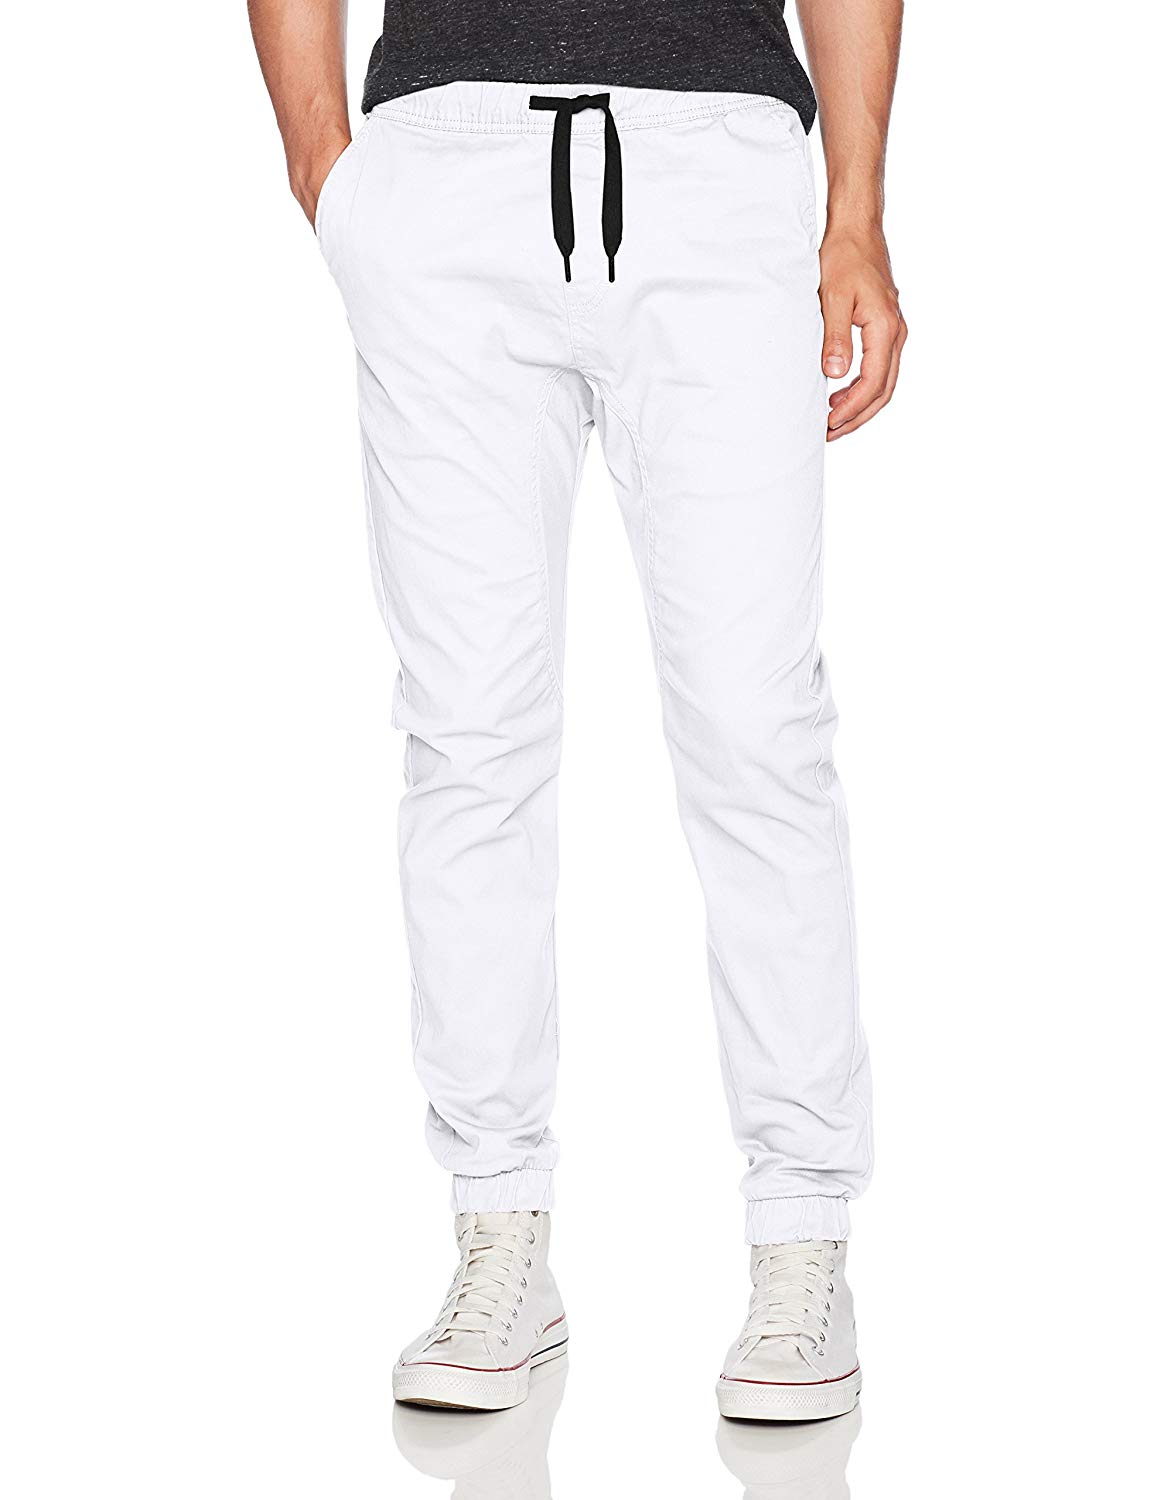 WT02 Men's Jogger Pants in Basic Solid Colors and, White(all Season ...